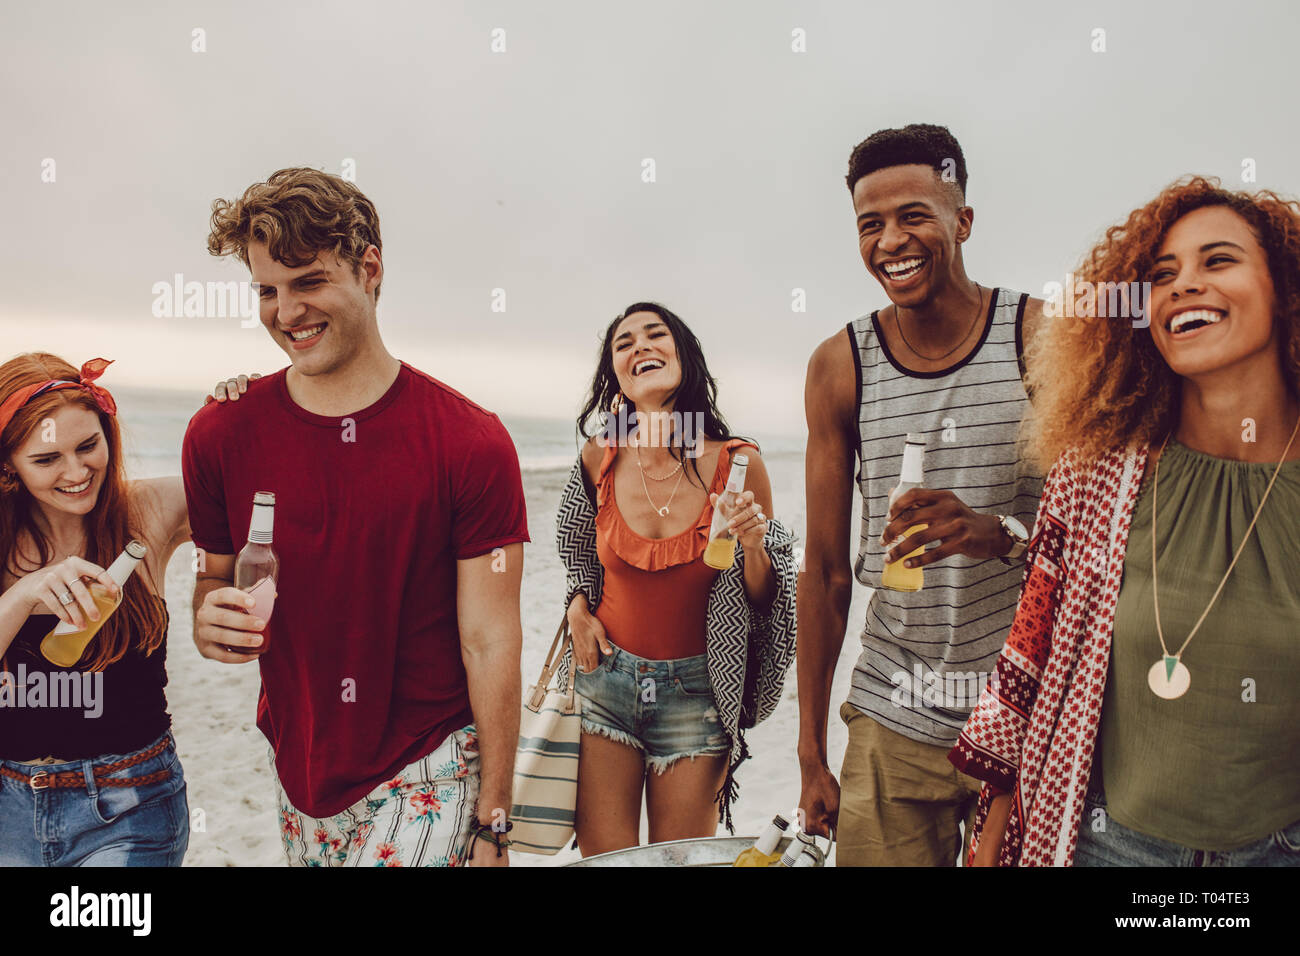 Group of people carrying beverage tub for party on beach. Diverse group of young people walking outdoors and having drinks. Stock Photo